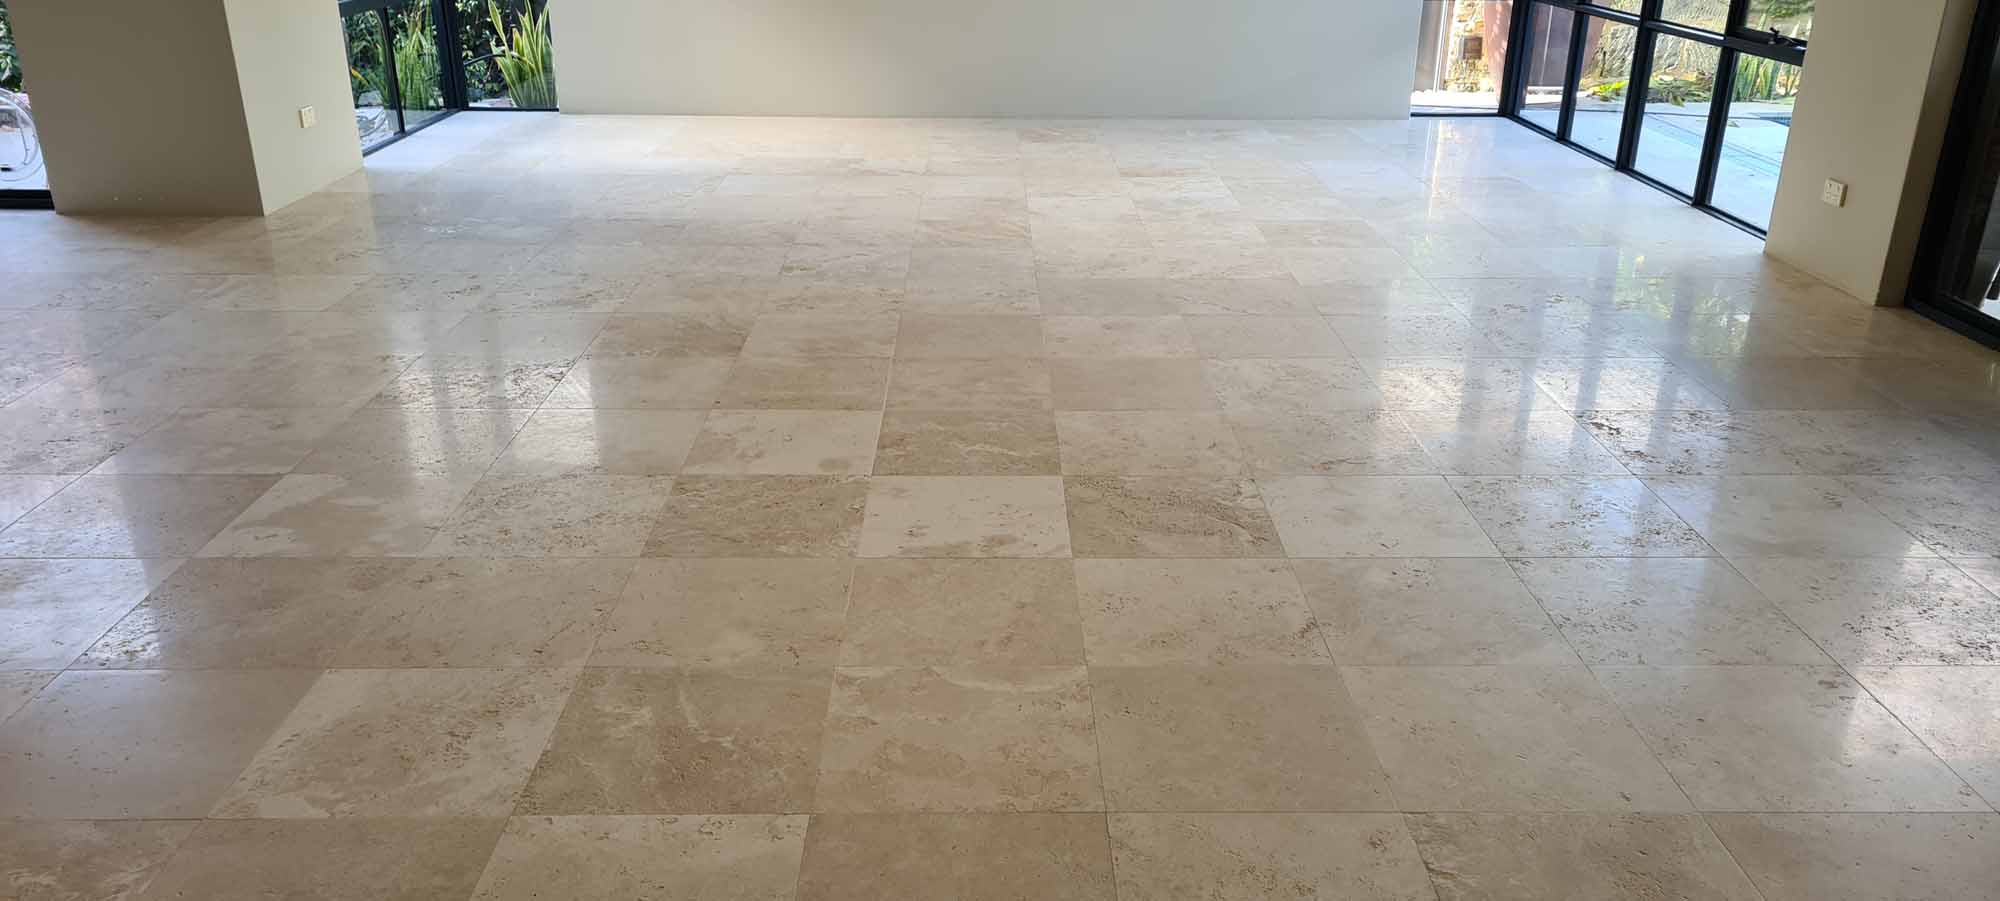 After Travertine Honing and Sealing in Perth WA